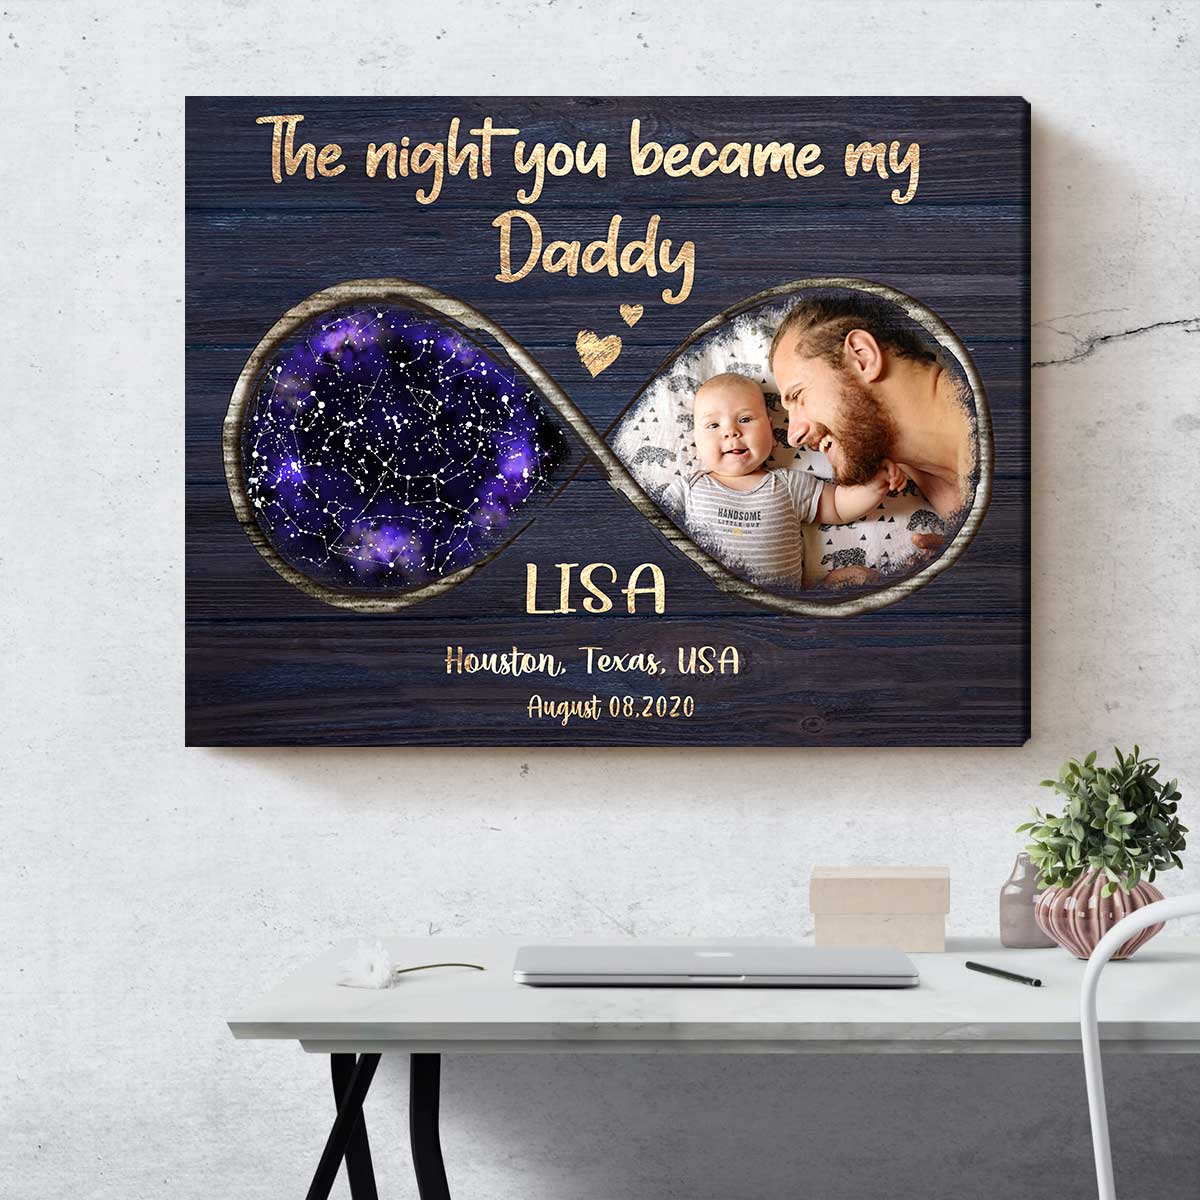 Kademi - It's time to start shopping for Father's Day presents and